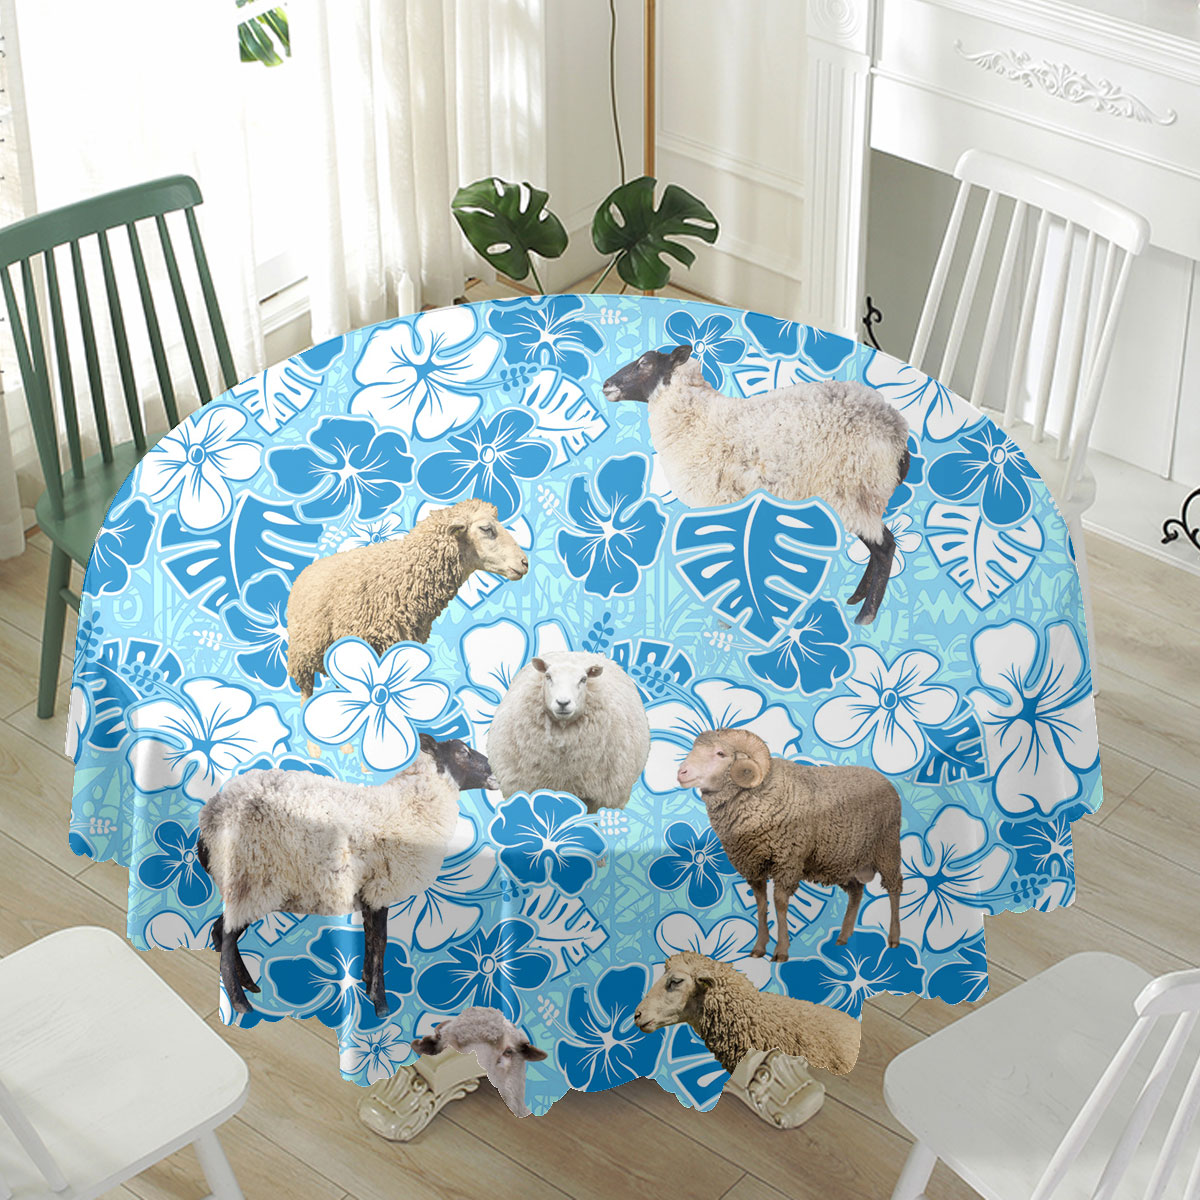 Sheep Blue Floral Waterproof Tablecloth